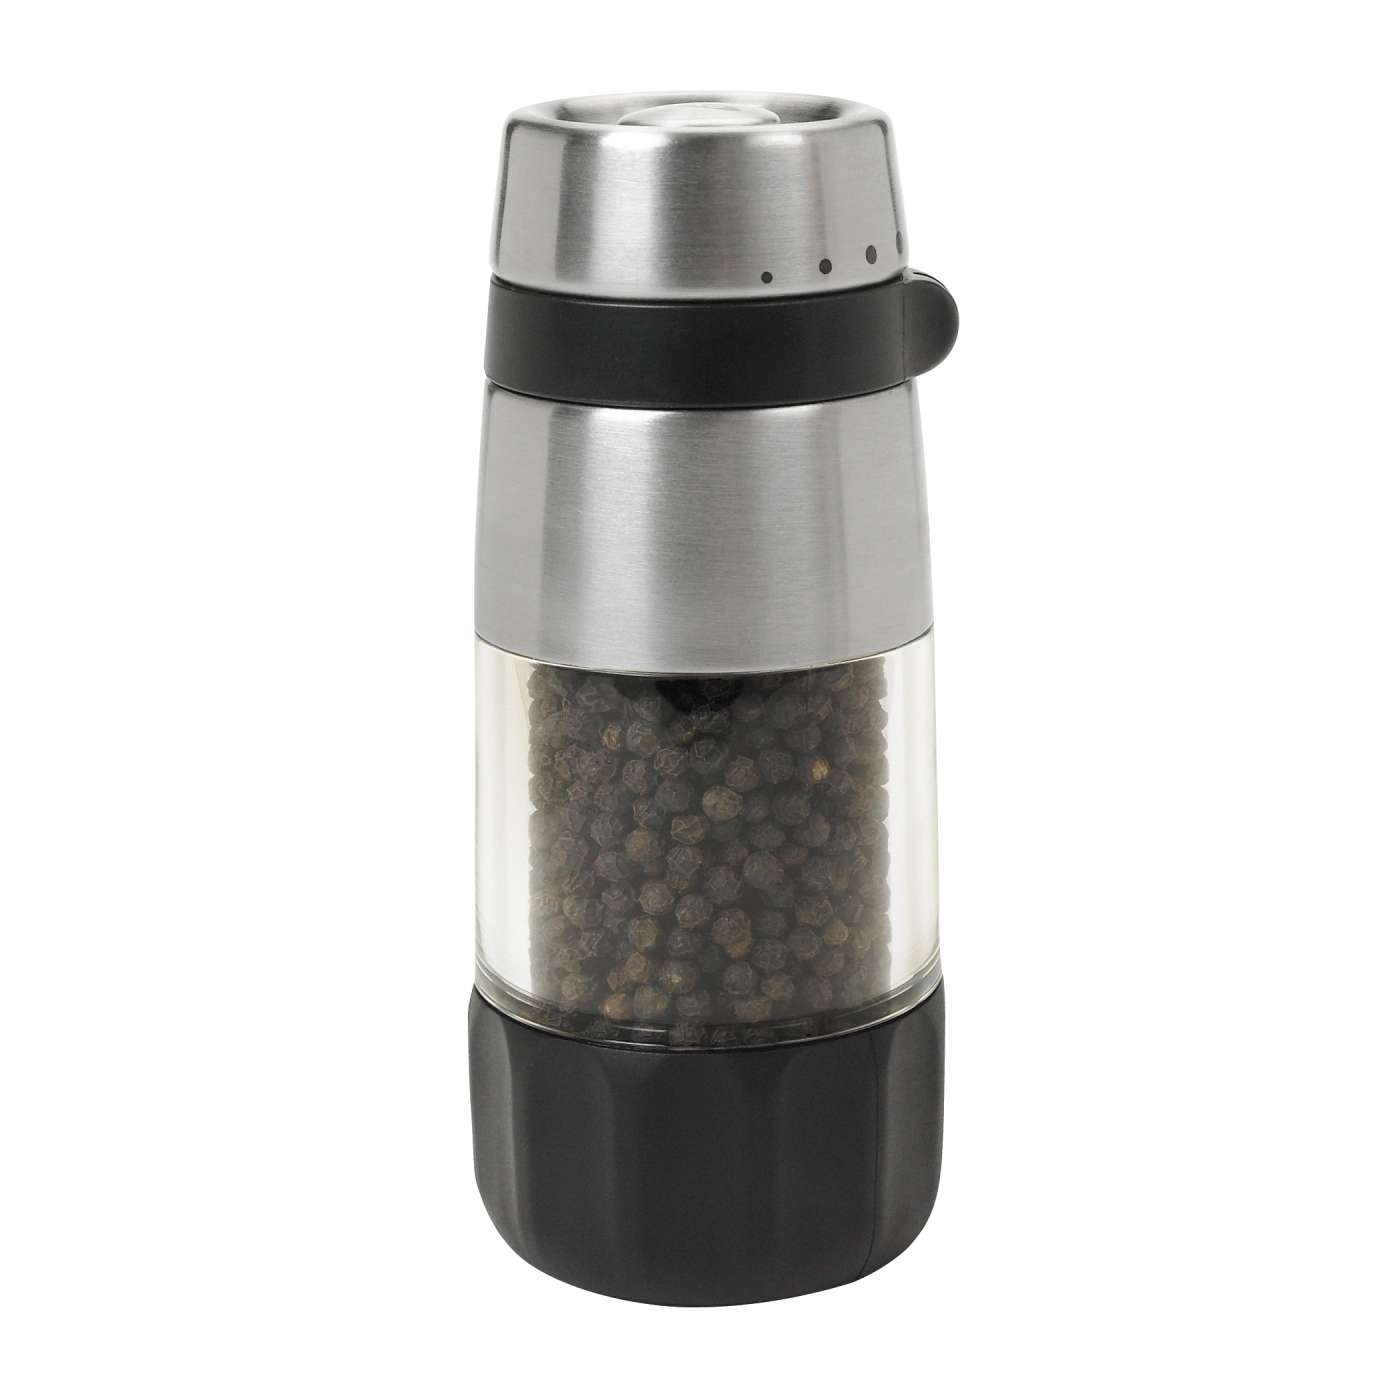 How To Use Salt And Pepper Grinder 